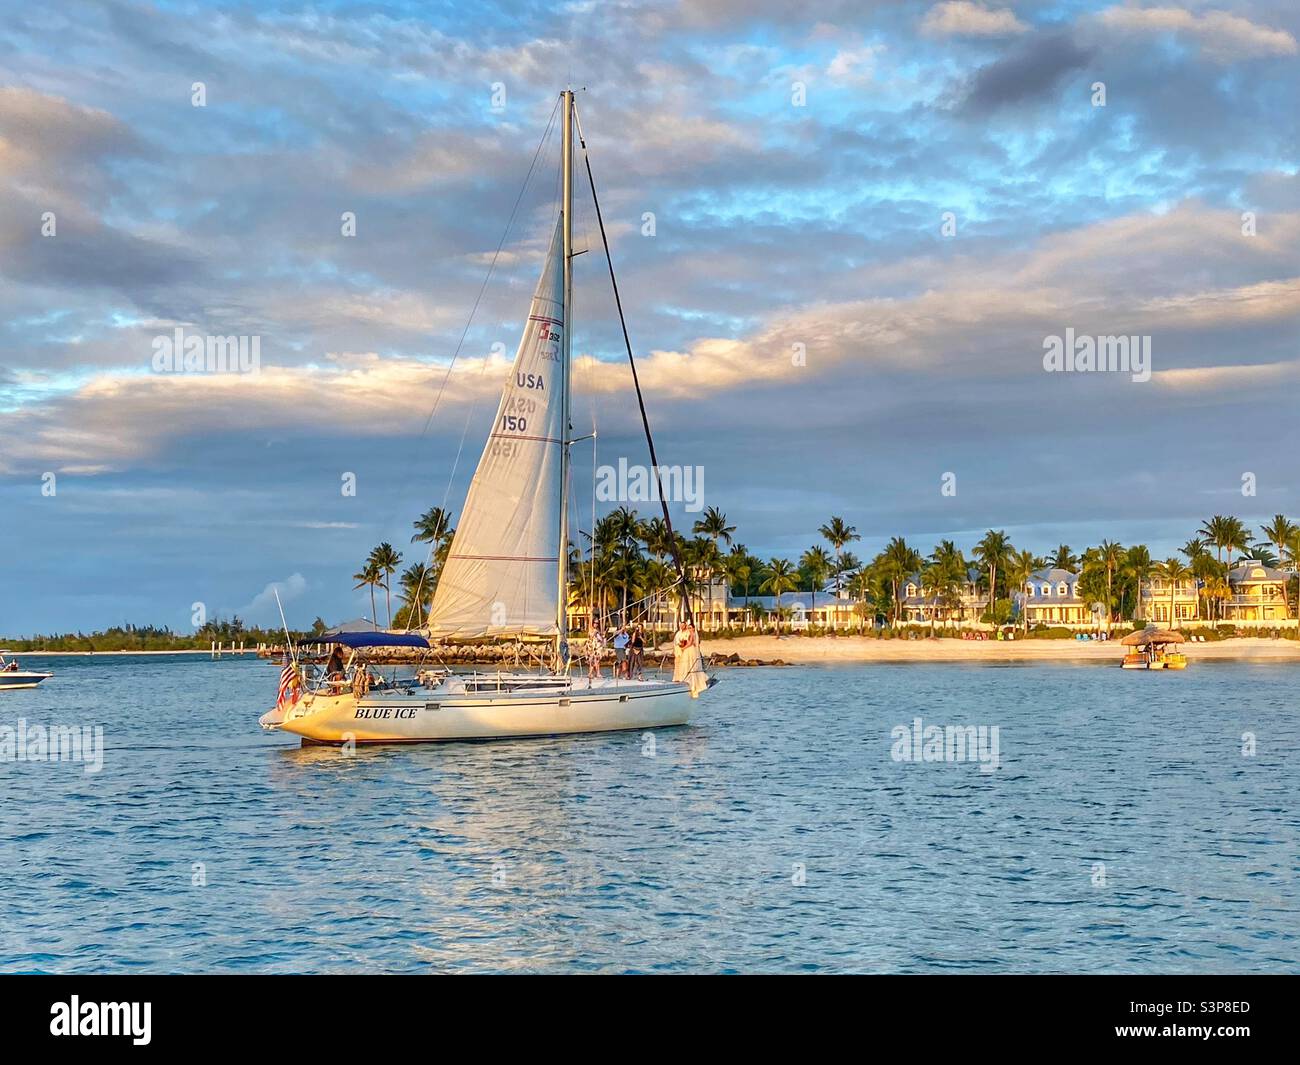 Wedding pictures on a sailboat in Key West during sunset Stock Photo